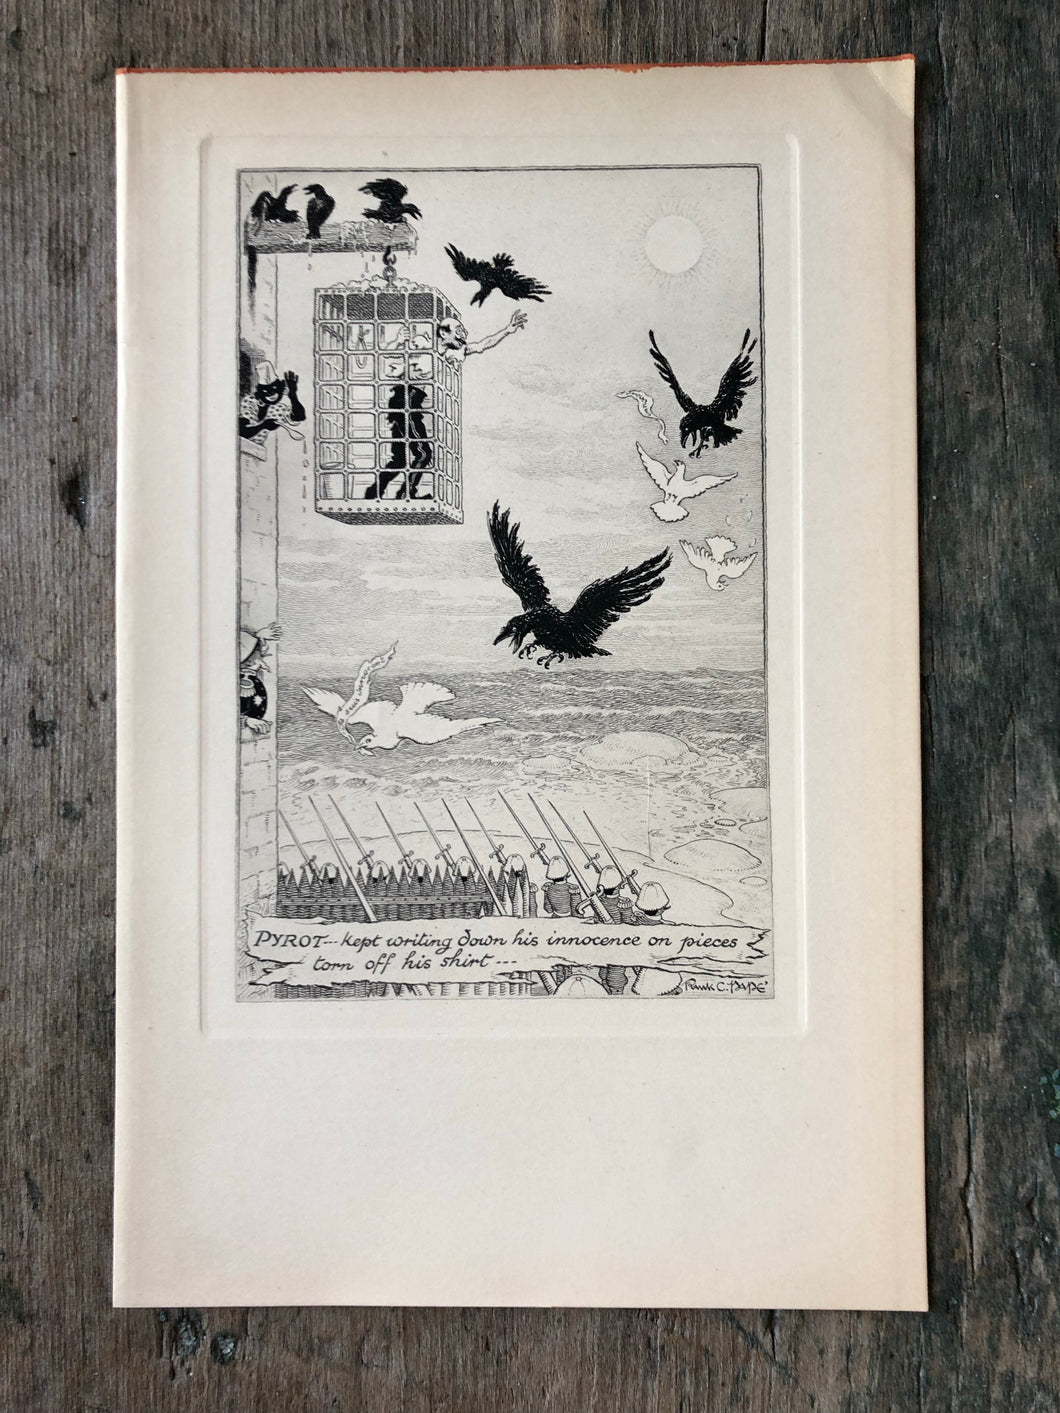 Print by Frank C. Pape from Penguin Island by Anatole France